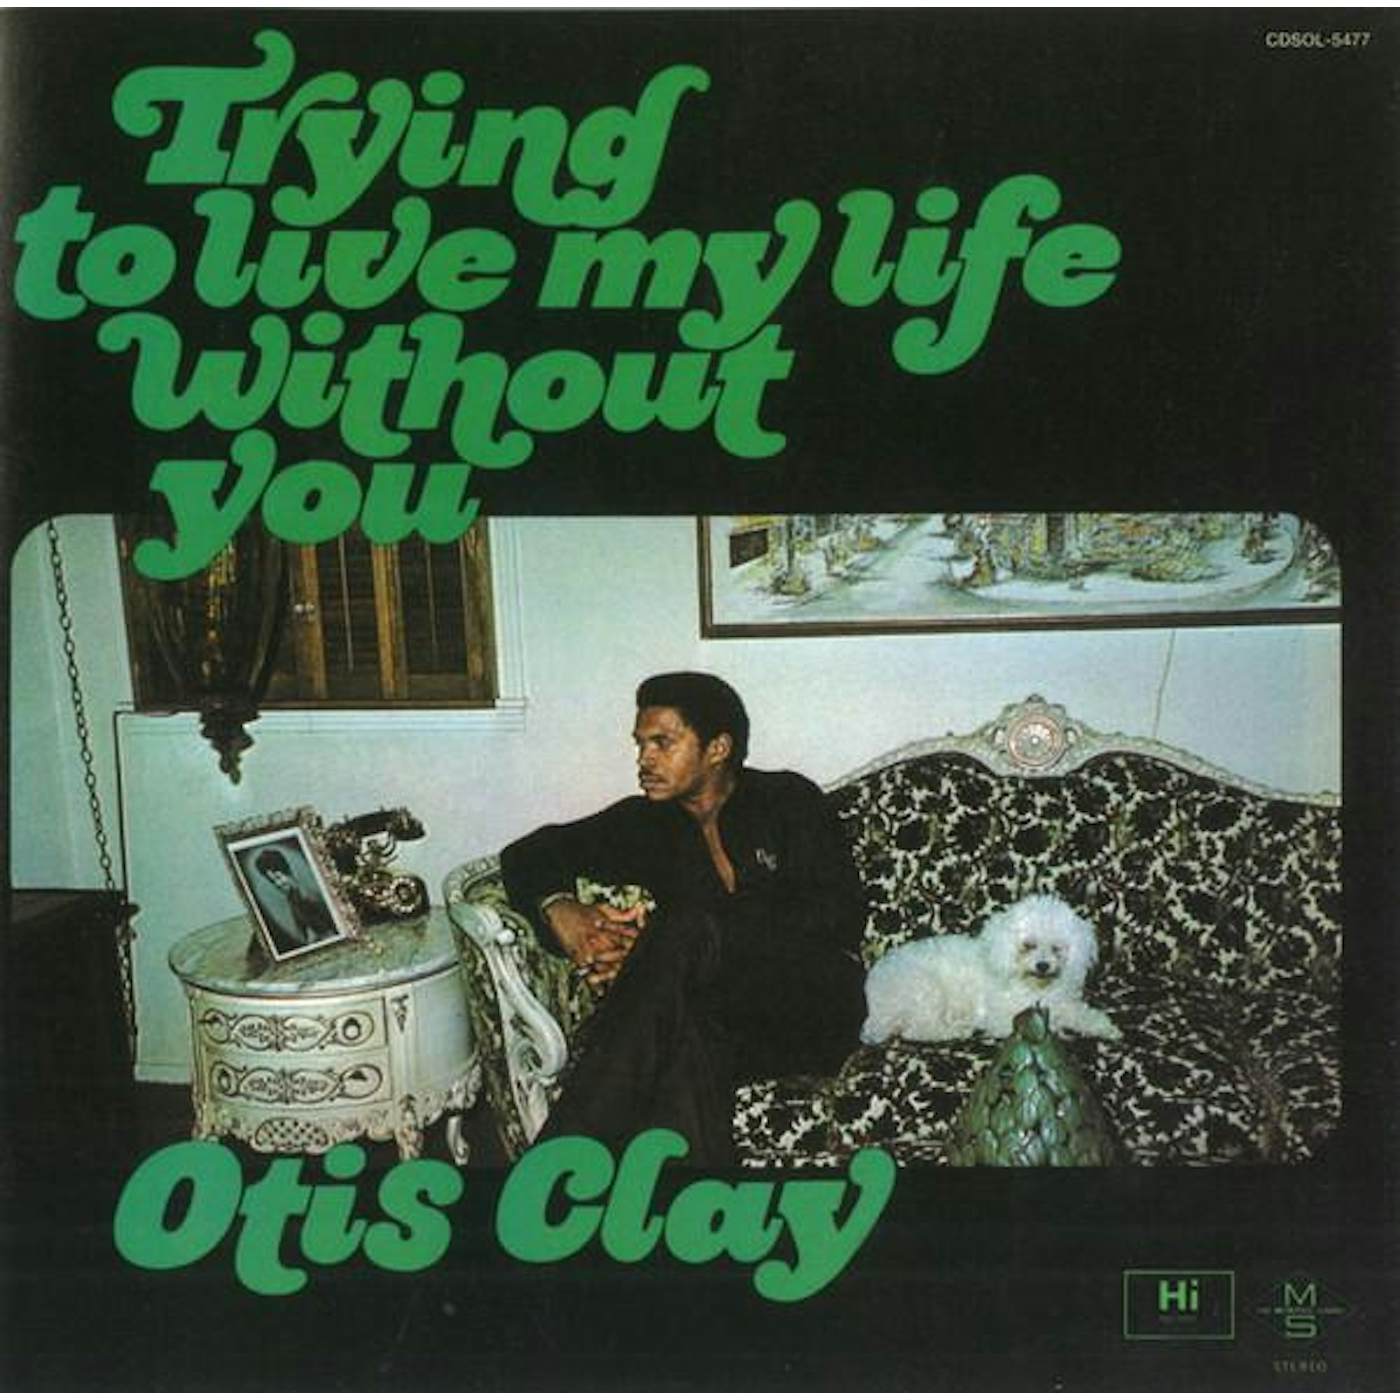 Otis Clay TRYING TO LIVE MY LIFE WITHOUT CD